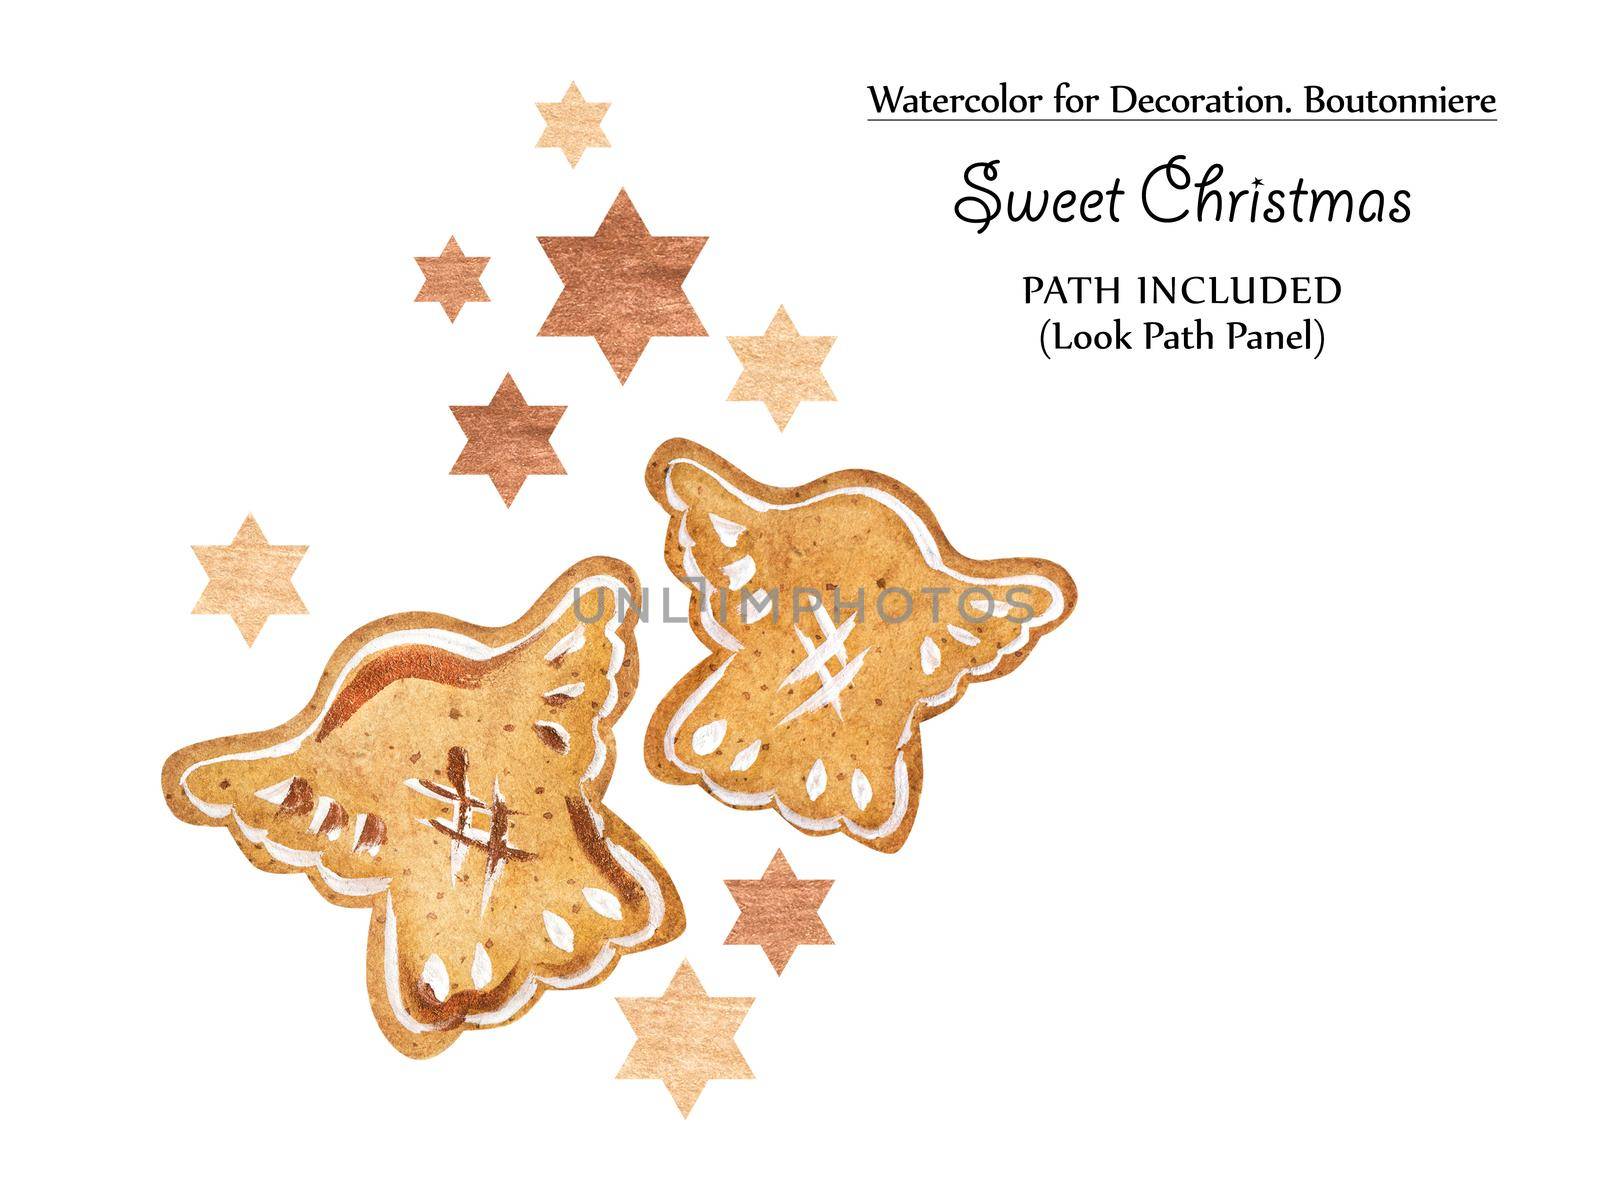 Sweet vignettes with gingerbreads and golden stars. Watercolor illustration, path included